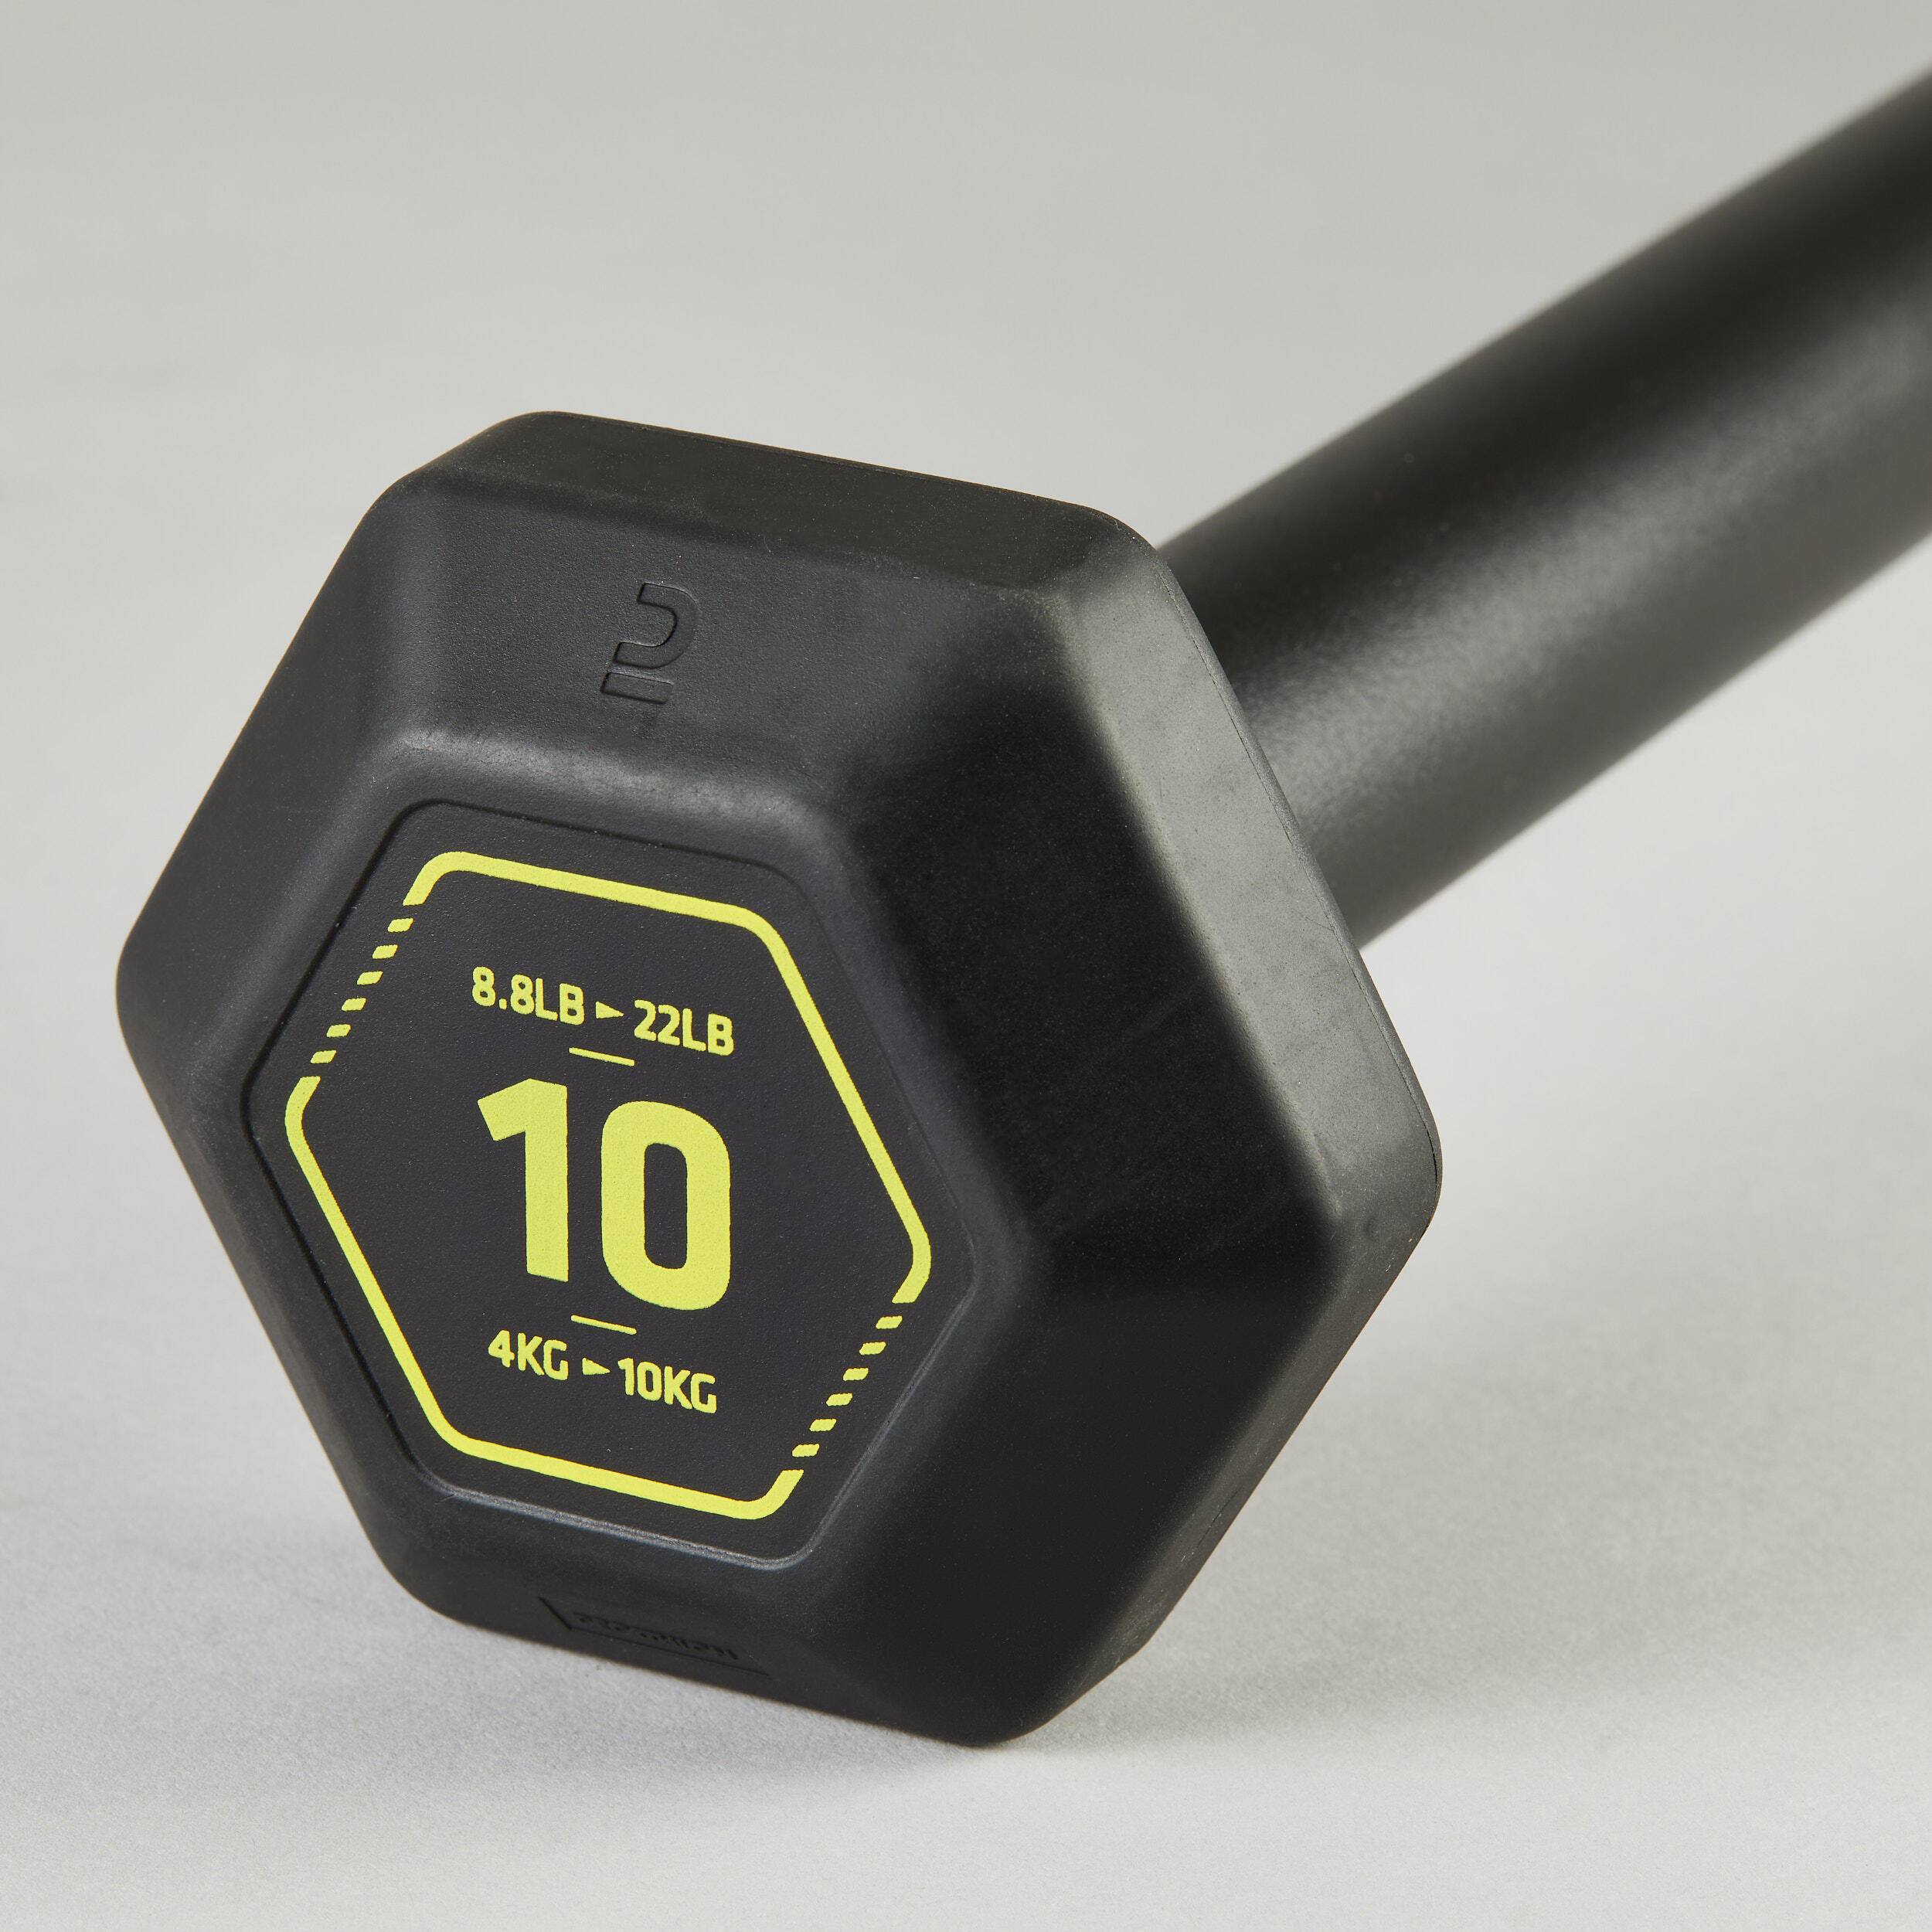 Adjustable Weighted Bar - 4 to 10 kg 4/11